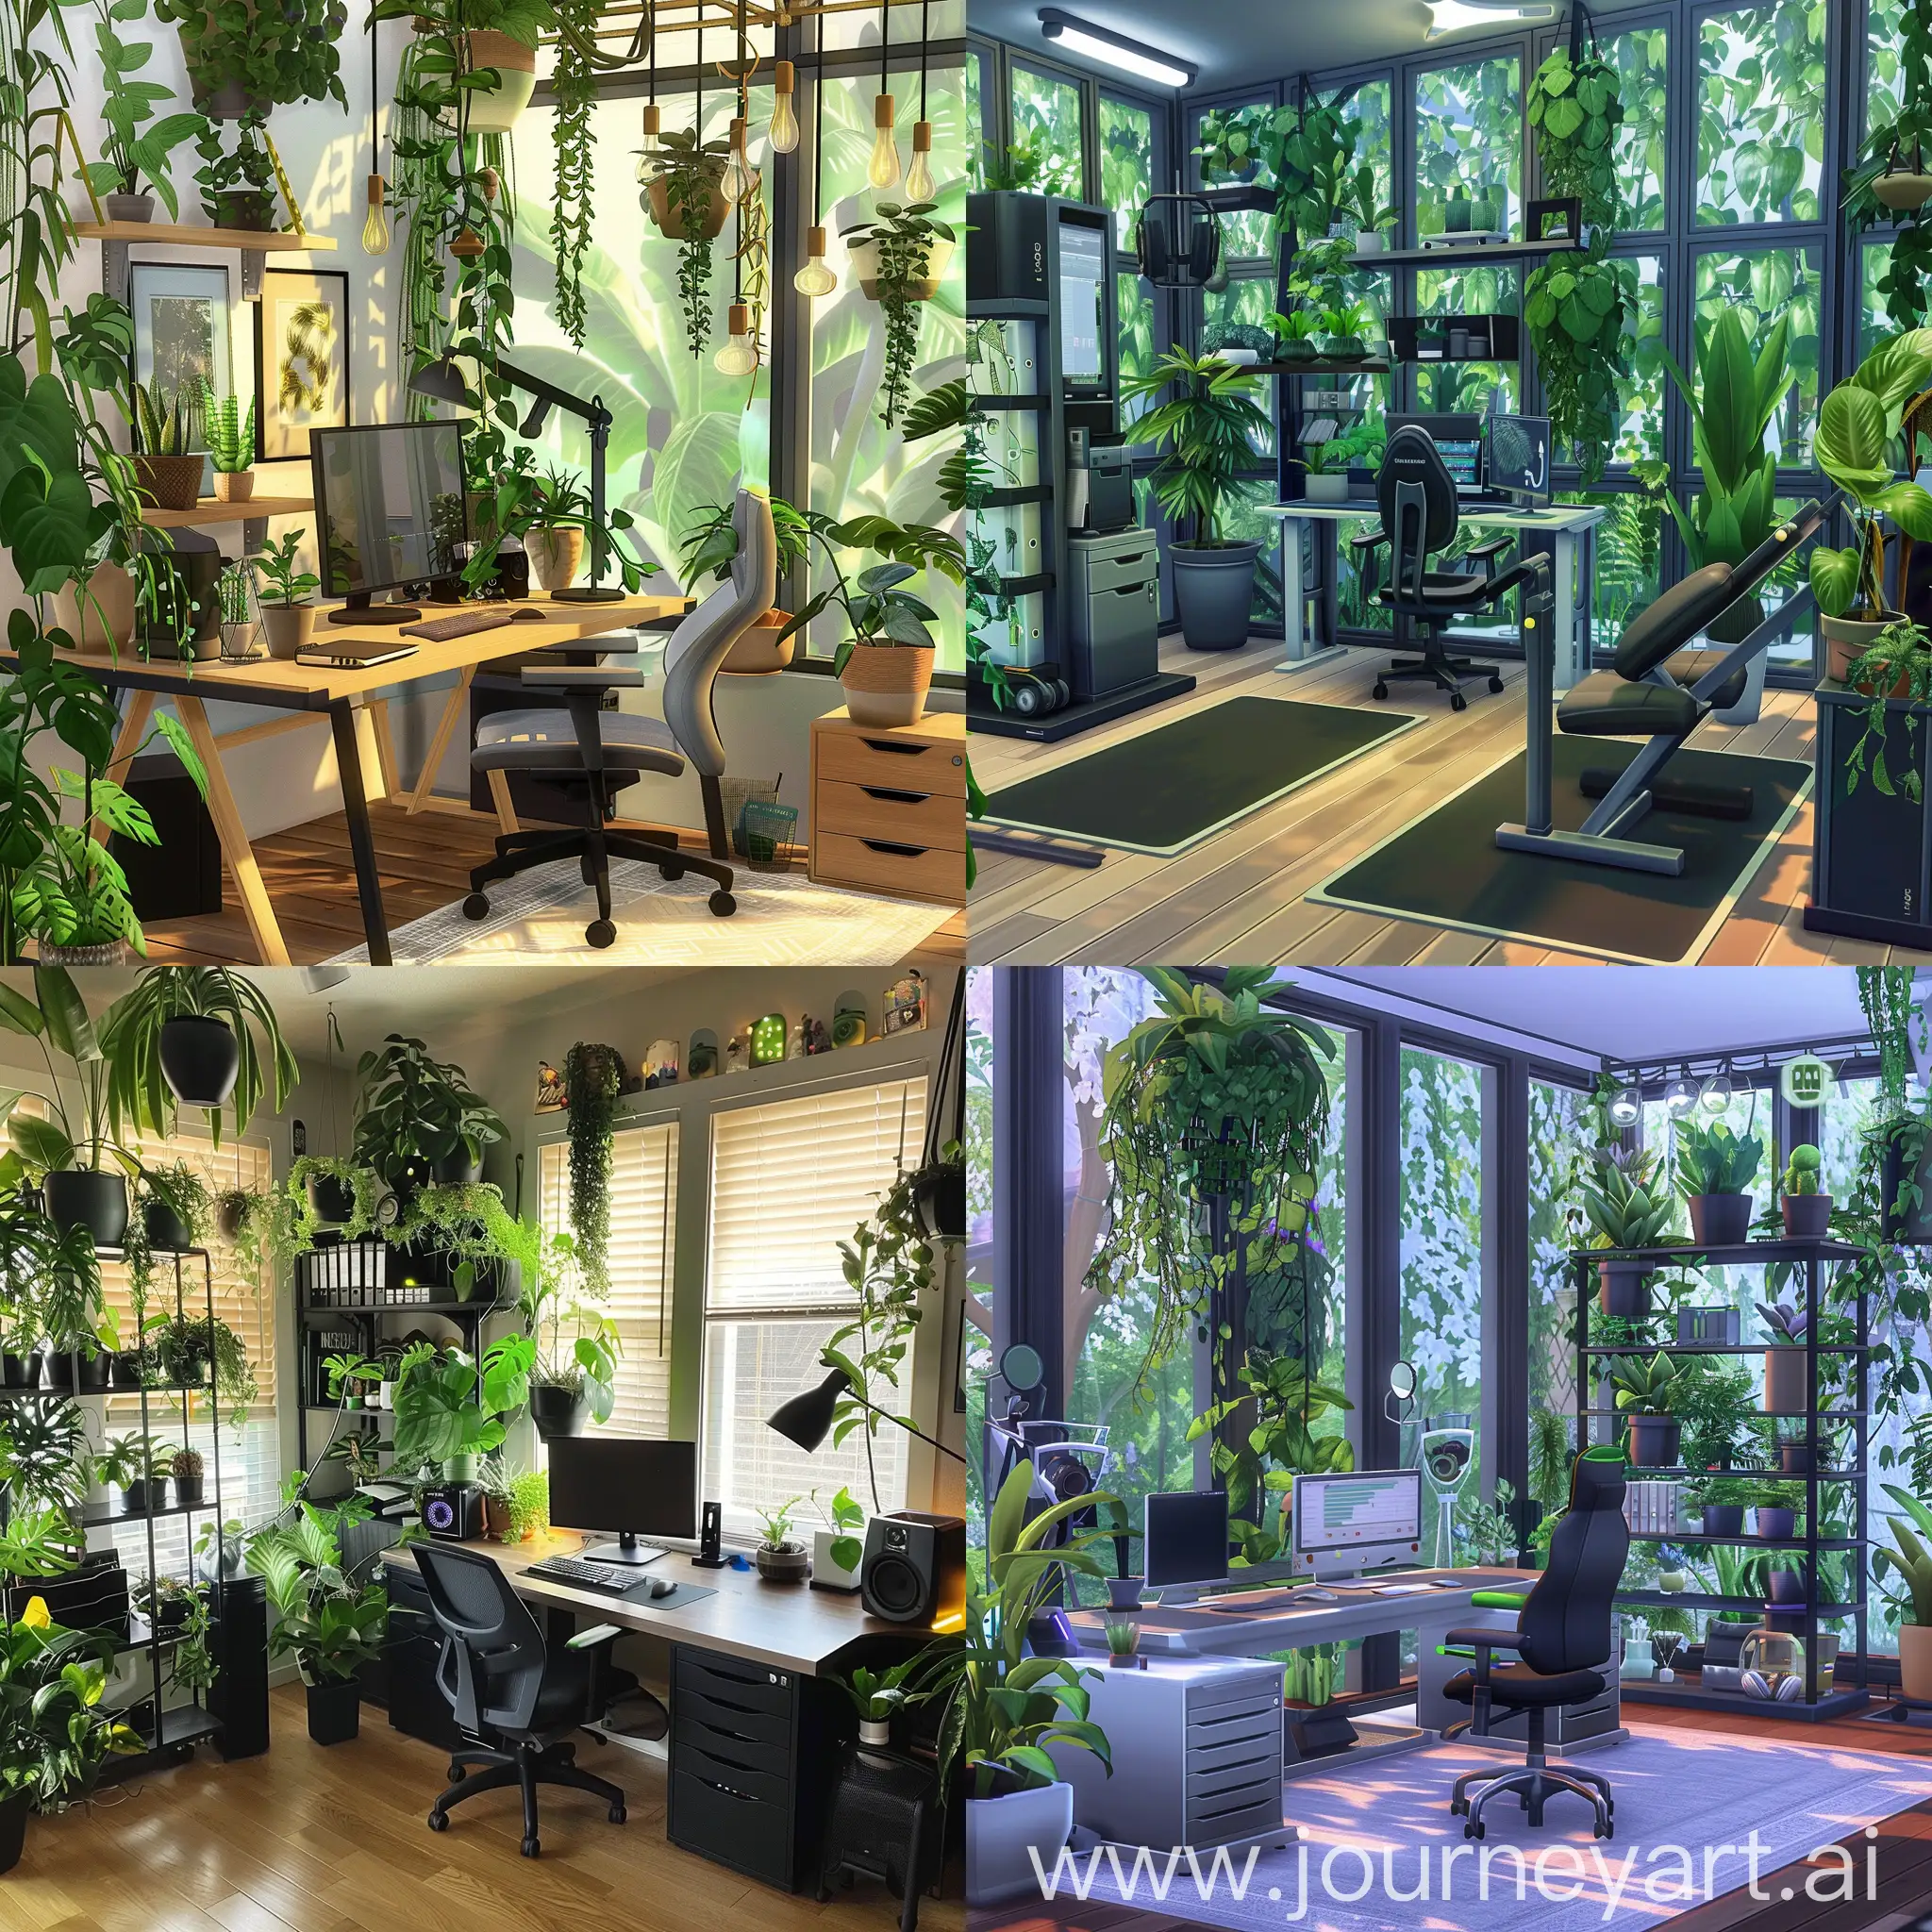 Build an office where i can feel myself comfortable and sporty at the same time with many plants and nice vibes